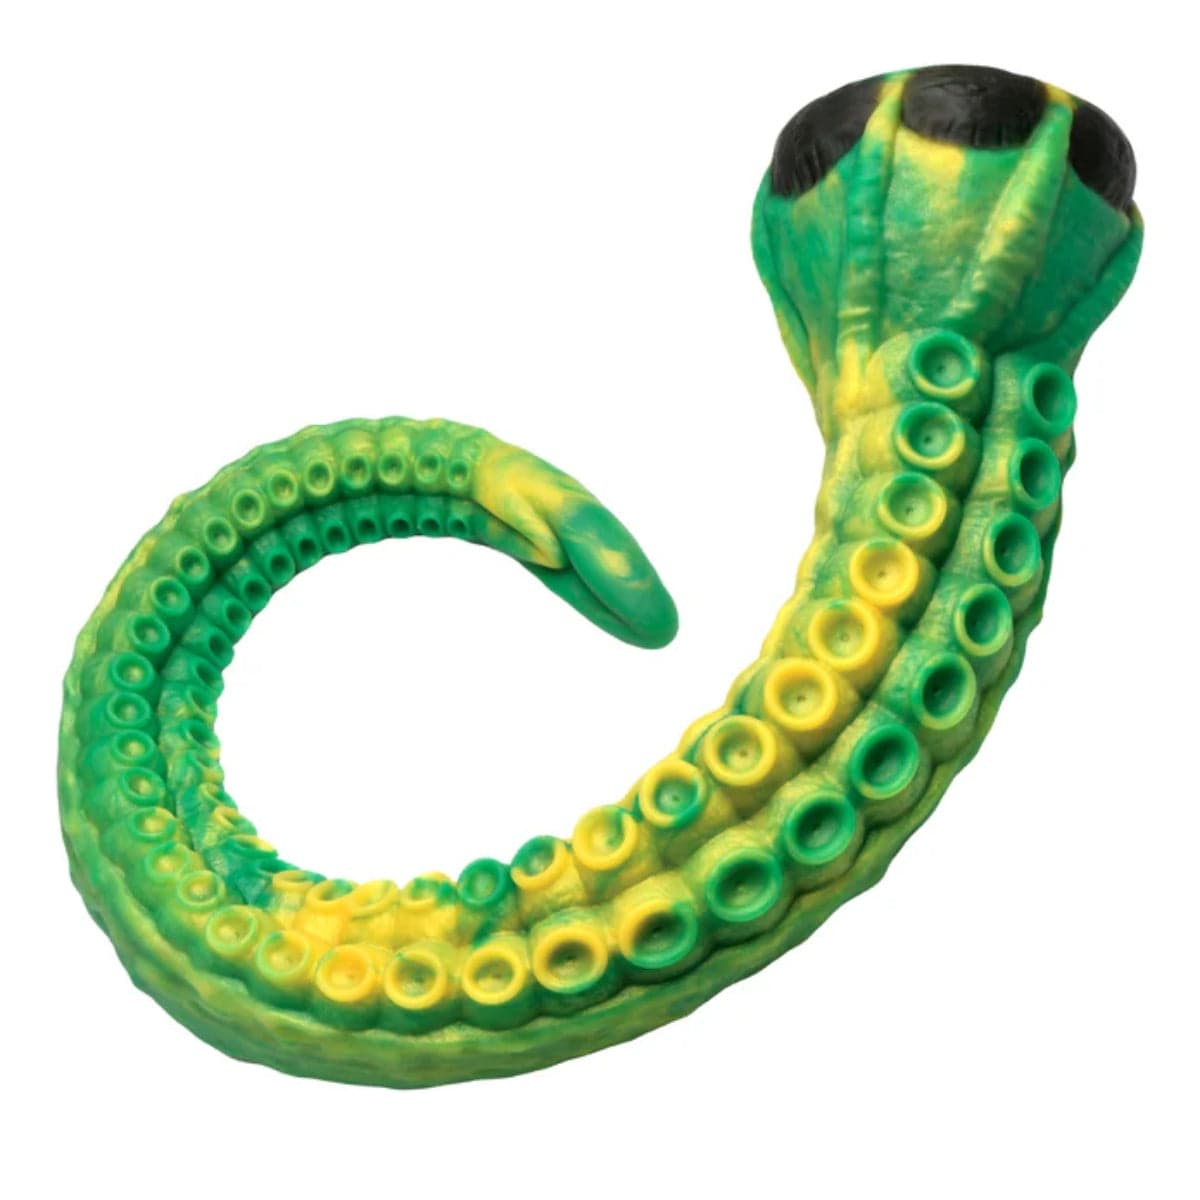 Creature Cocks - Titan Tentacle Extra Long Silicone Dildo with Suction Base | 22.5 inches creature cocks - For Me To Love